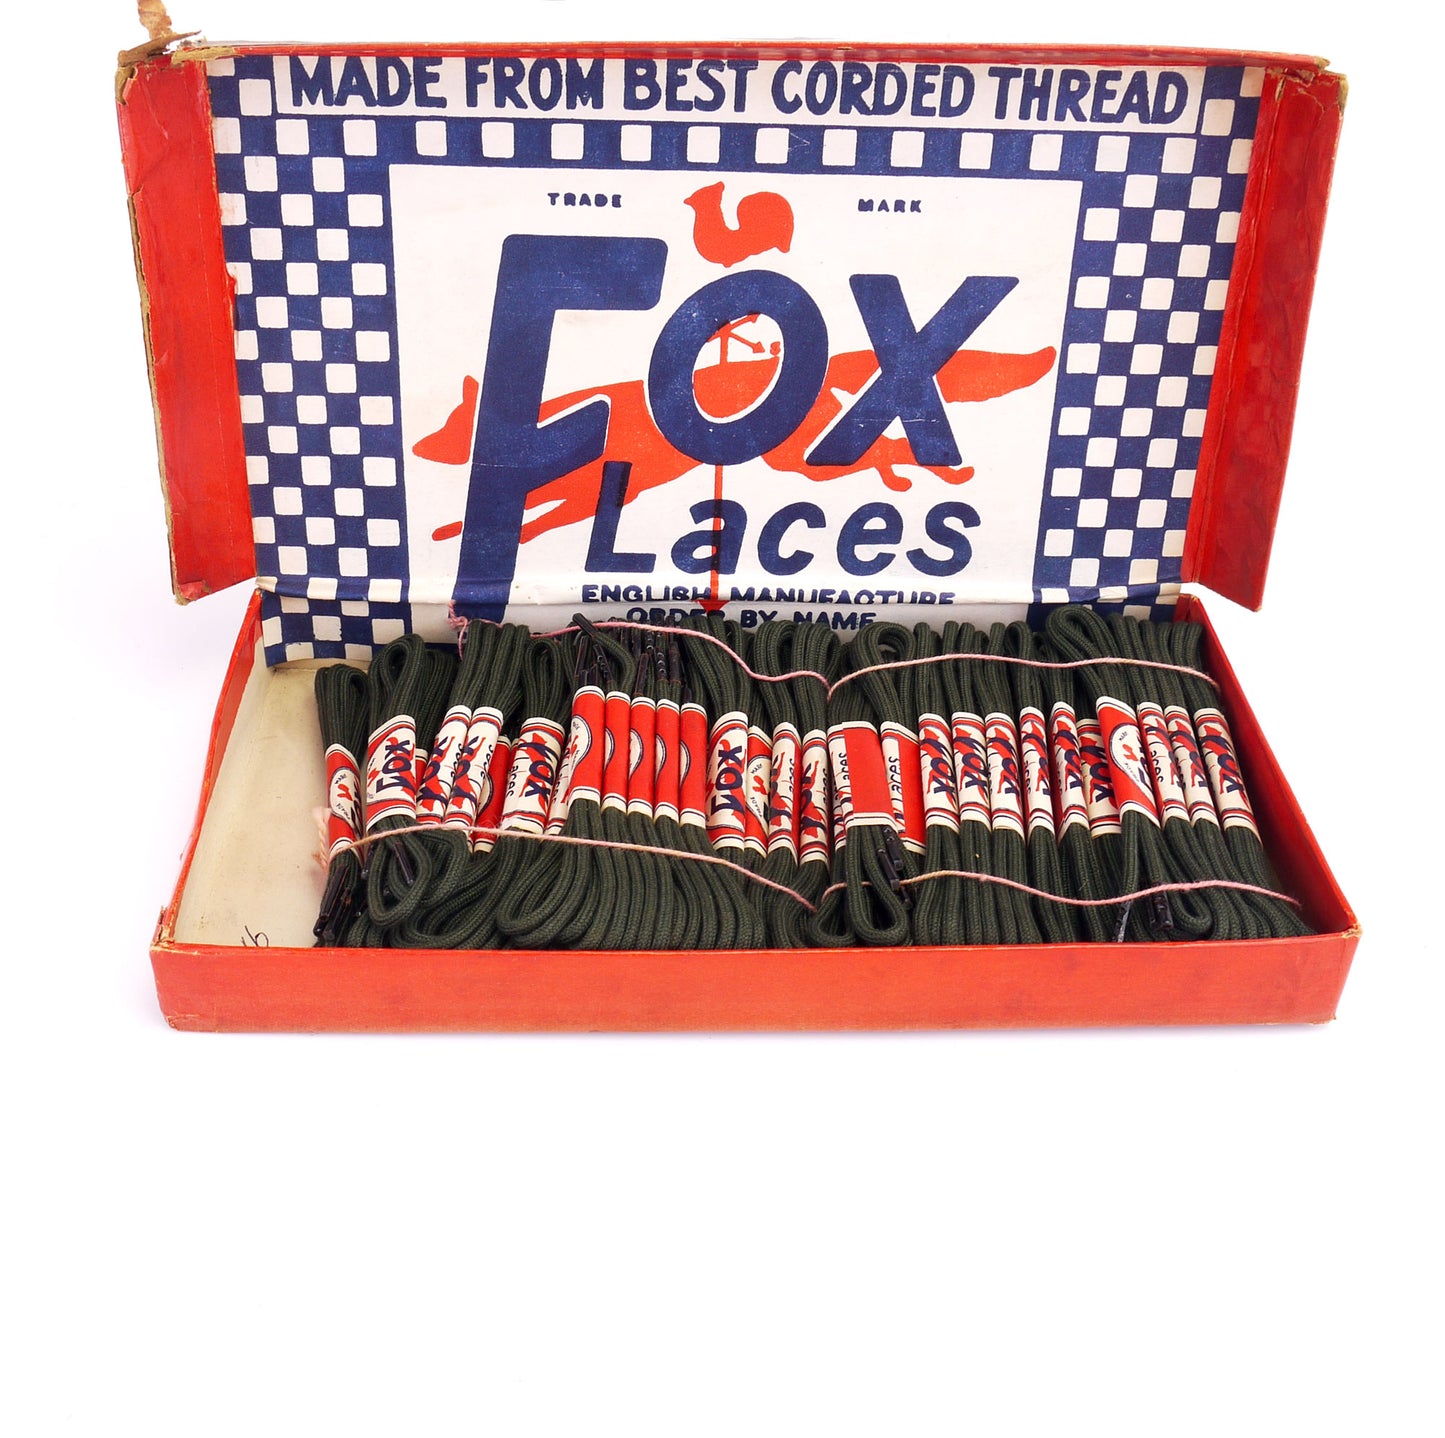 1930s Fox's Round Green 16 Inch Shoe Laces